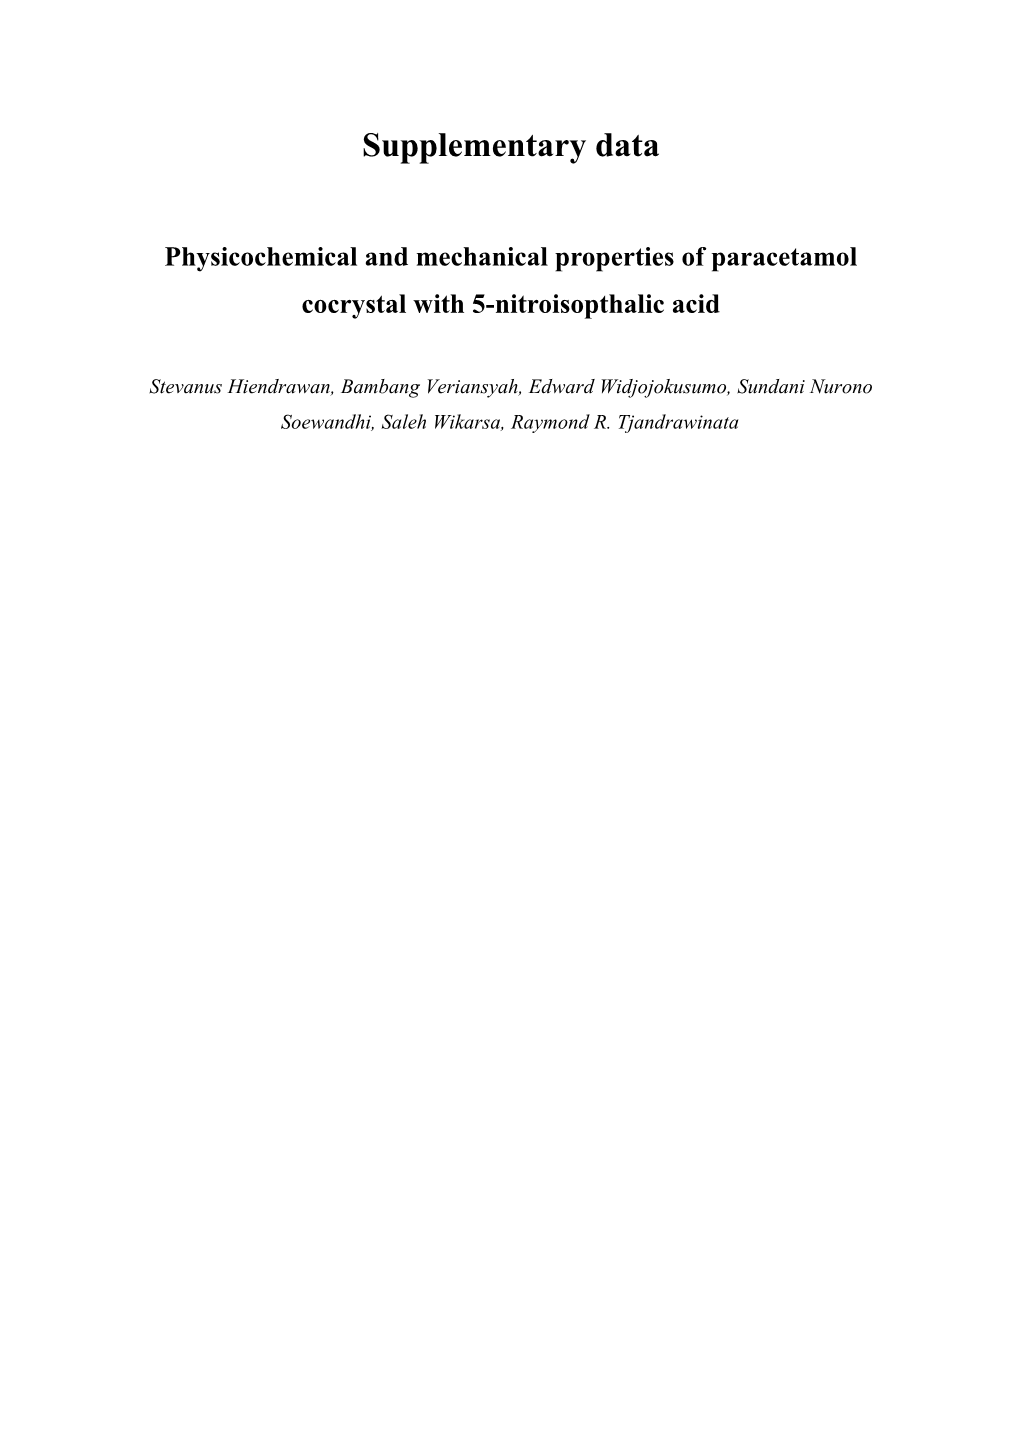 Physicochemical and Mechanical Properties of Paracetamol Cocrystal with 5-Nitroisopthalic Acid